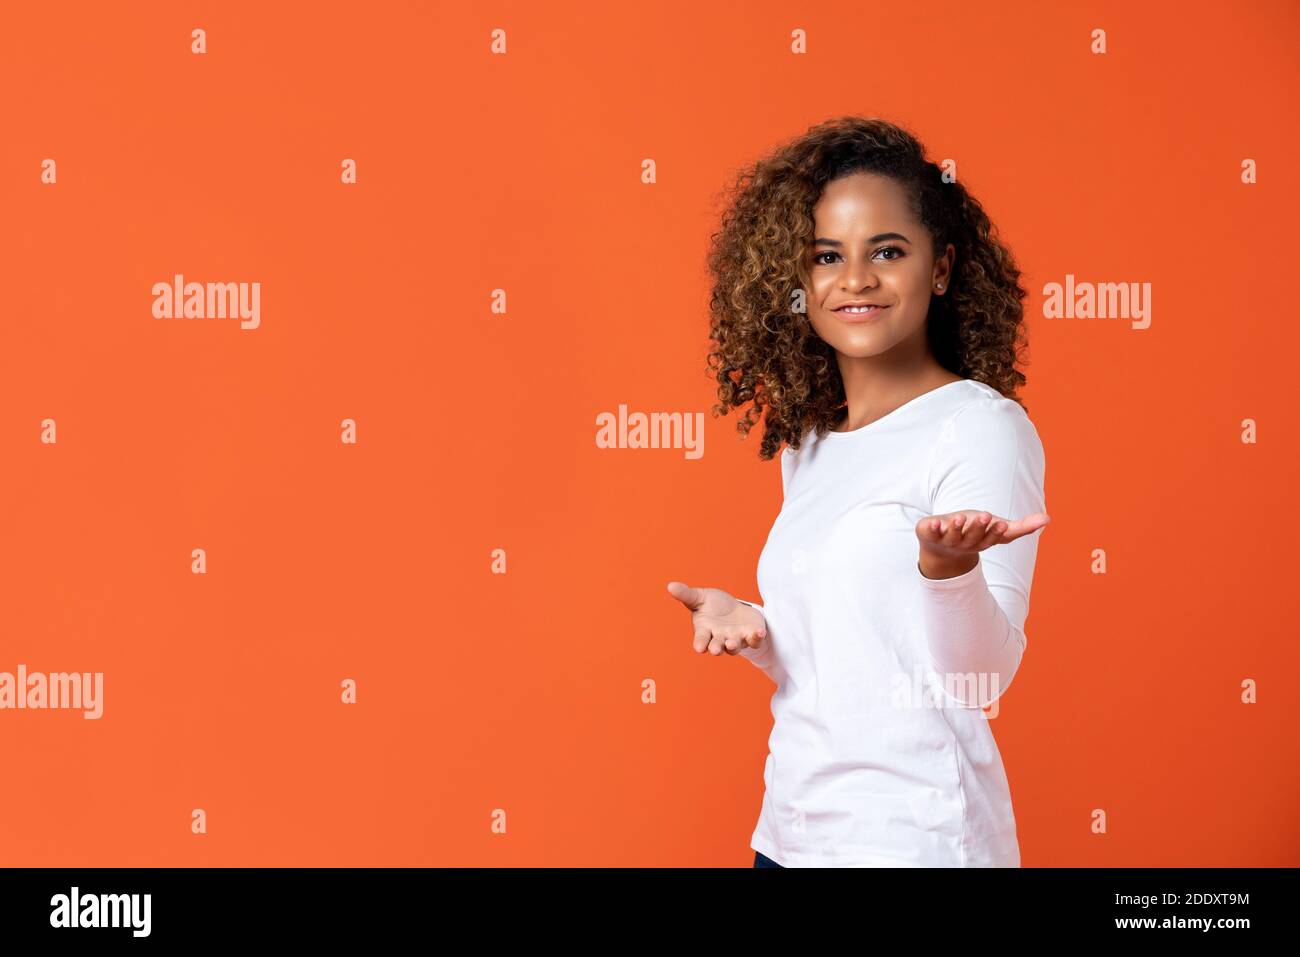 Happy smiling young African American woman doing welcome or presenting gesture with open hands isolated on orange studio background with copy space Stock Photo